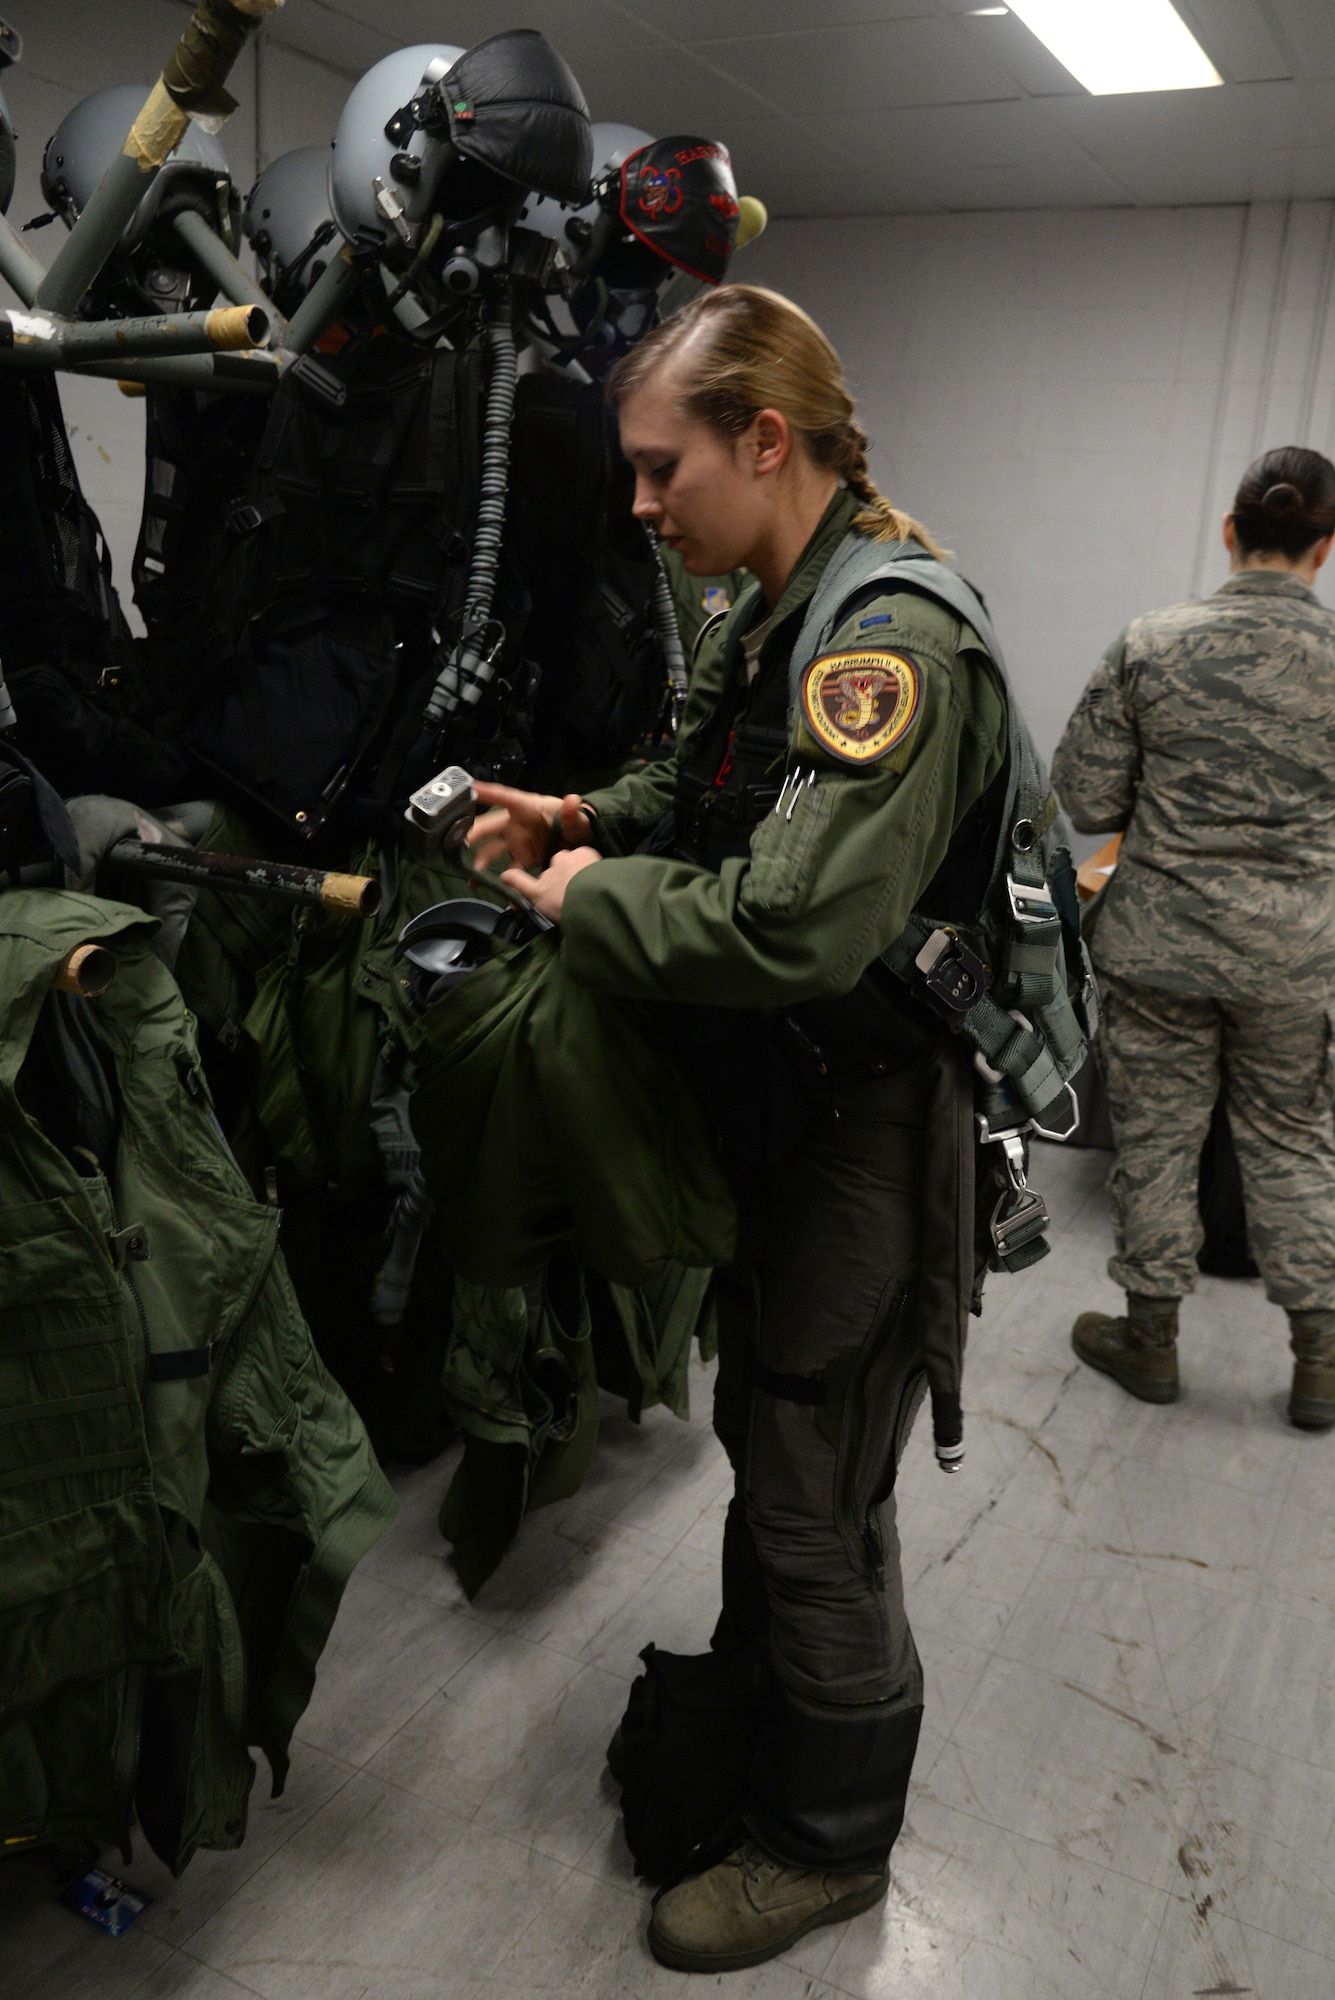 U.S. Air Force 1st Lt. Brittany Trimble, 36th Fighter Squadron pilot, puts on her air flight crew equipment, Feb. 15, 2016, at Korat Royal Thai Air Force Base, Thailand. For Trimble her goal of becoming a pilot was finally realized during her first experience donning her air flight crew equipment. (U.S. Air Force photo by Staff Sgt. Amber E. Jacobs)